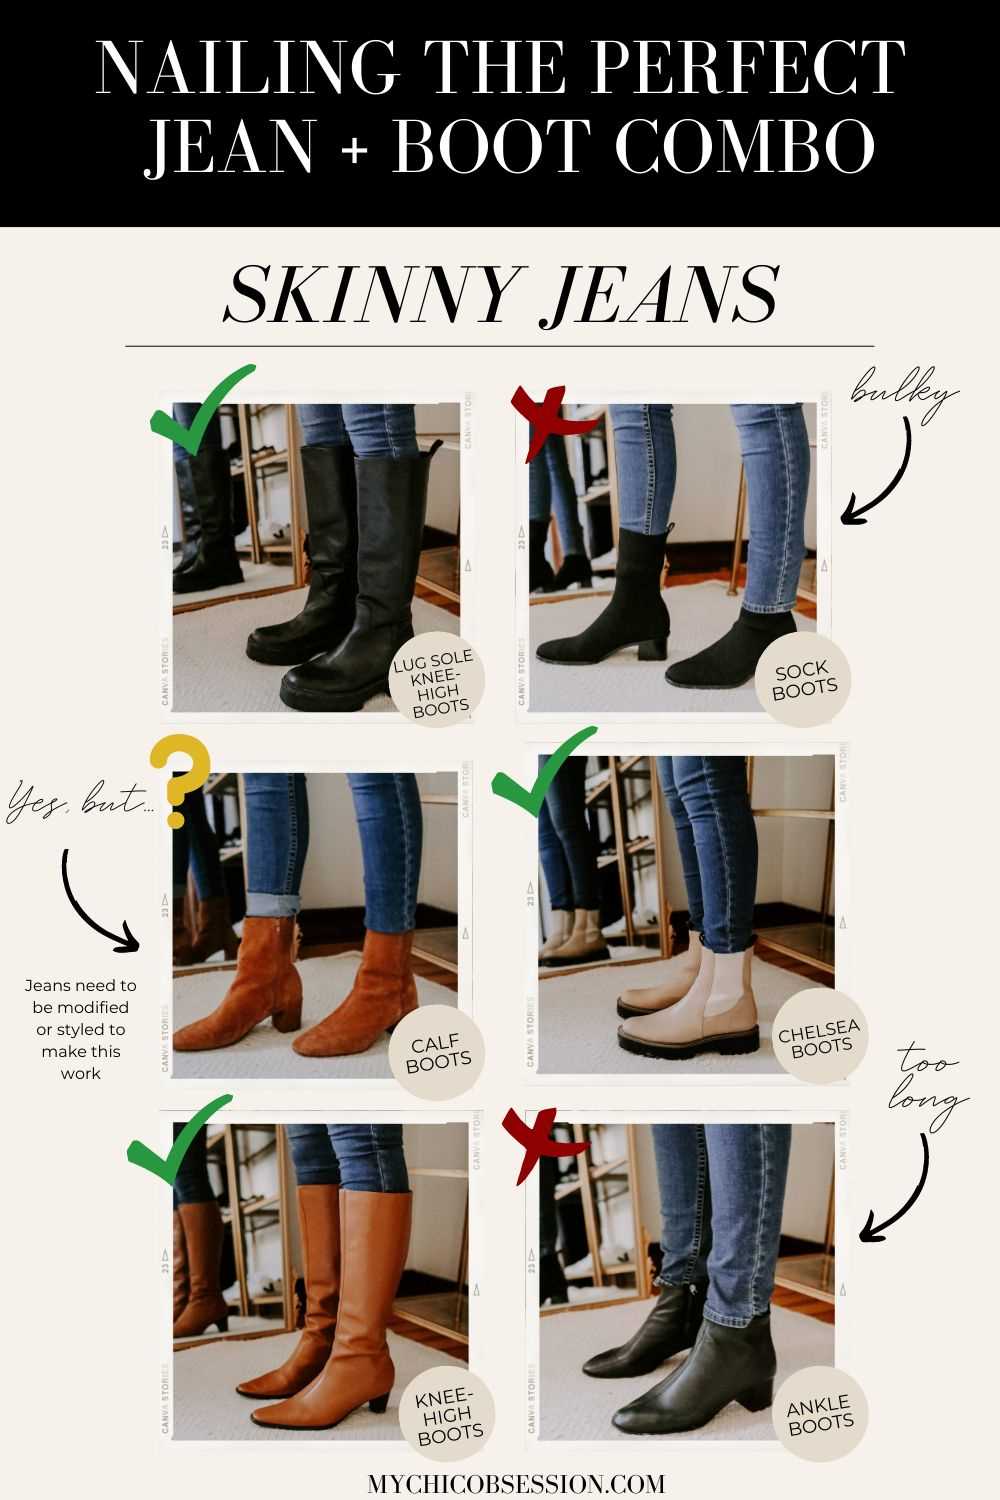 How to wear jeans and ankle boots